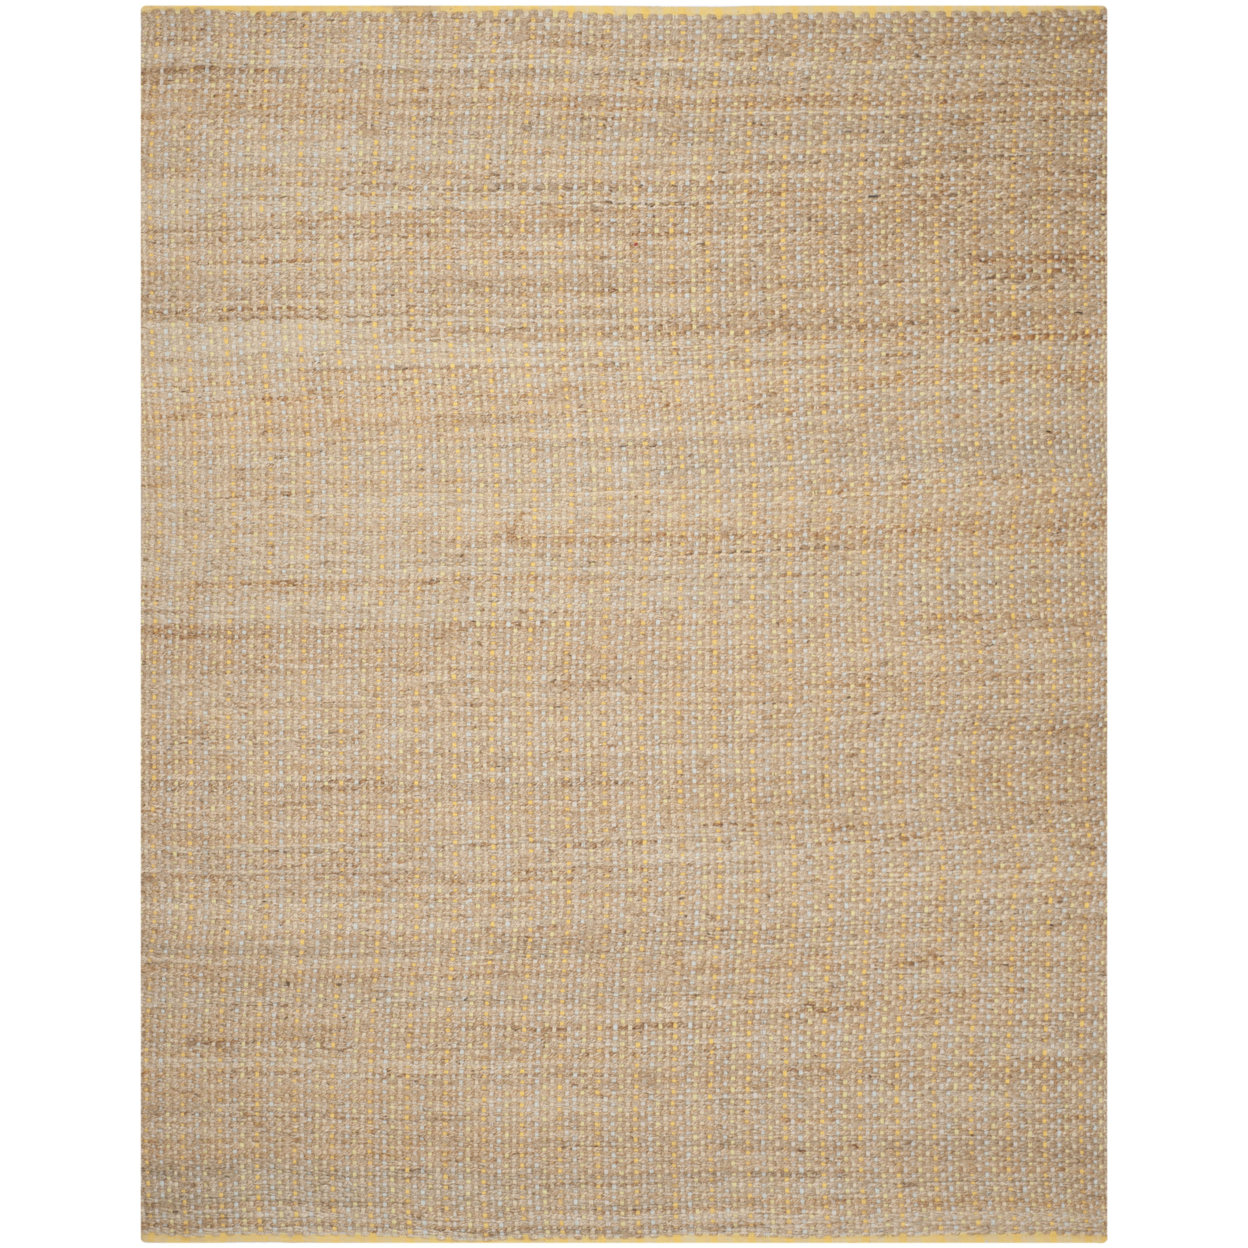 SAFAVIEH Cape Cod Collection CAP811A Handwoven Yellow Rug - 8' X 10'